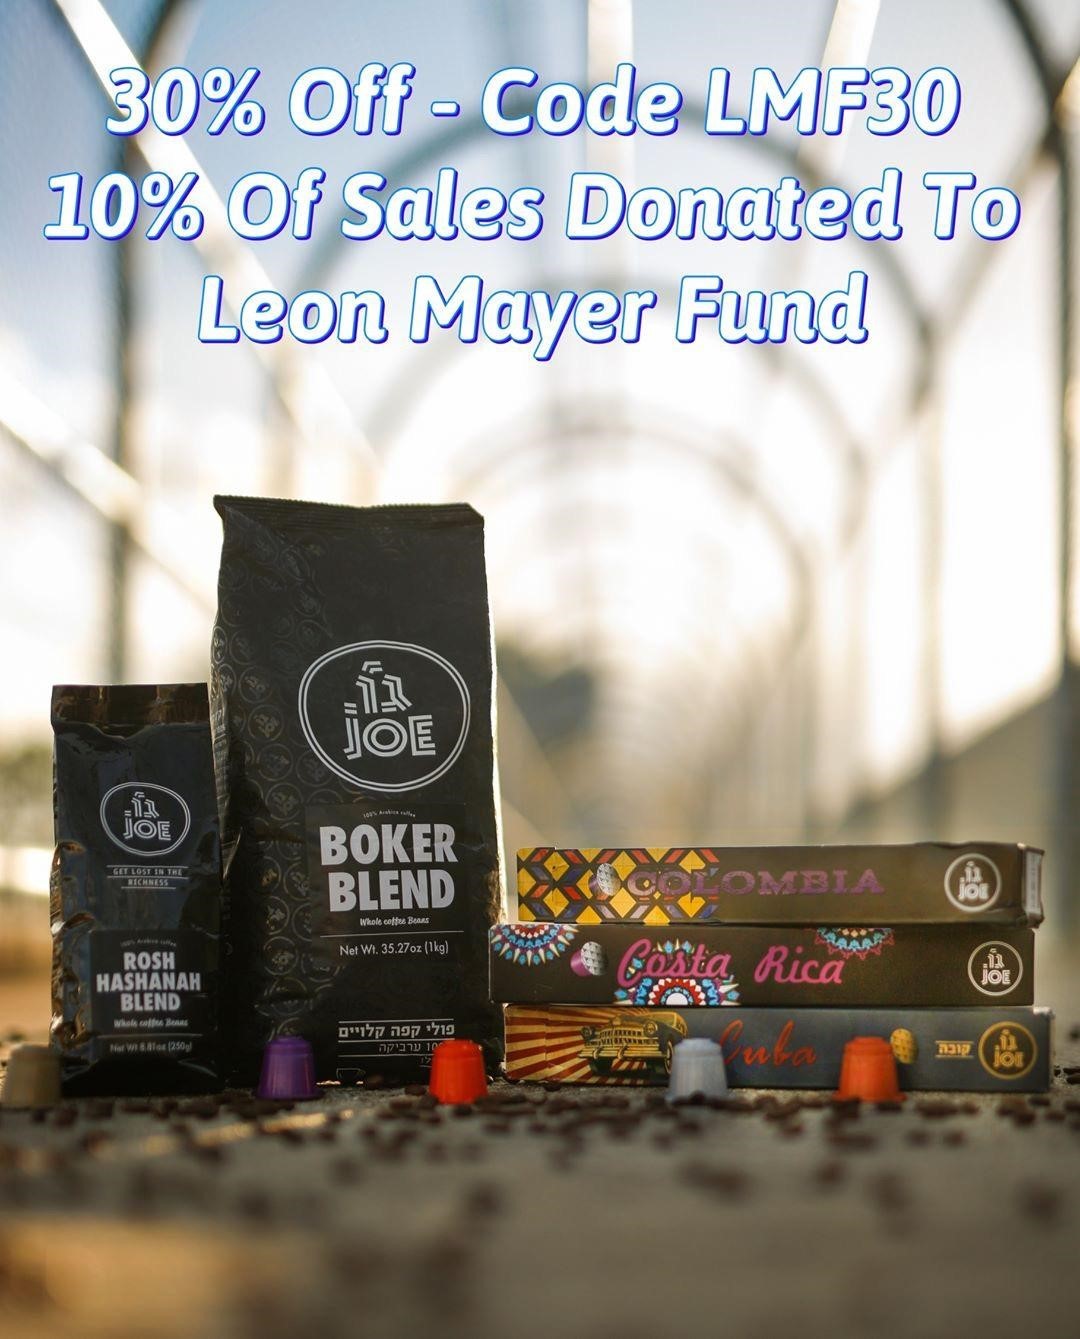 Enjoy Delicious Coffee While Helping The Leon Mayer Fund